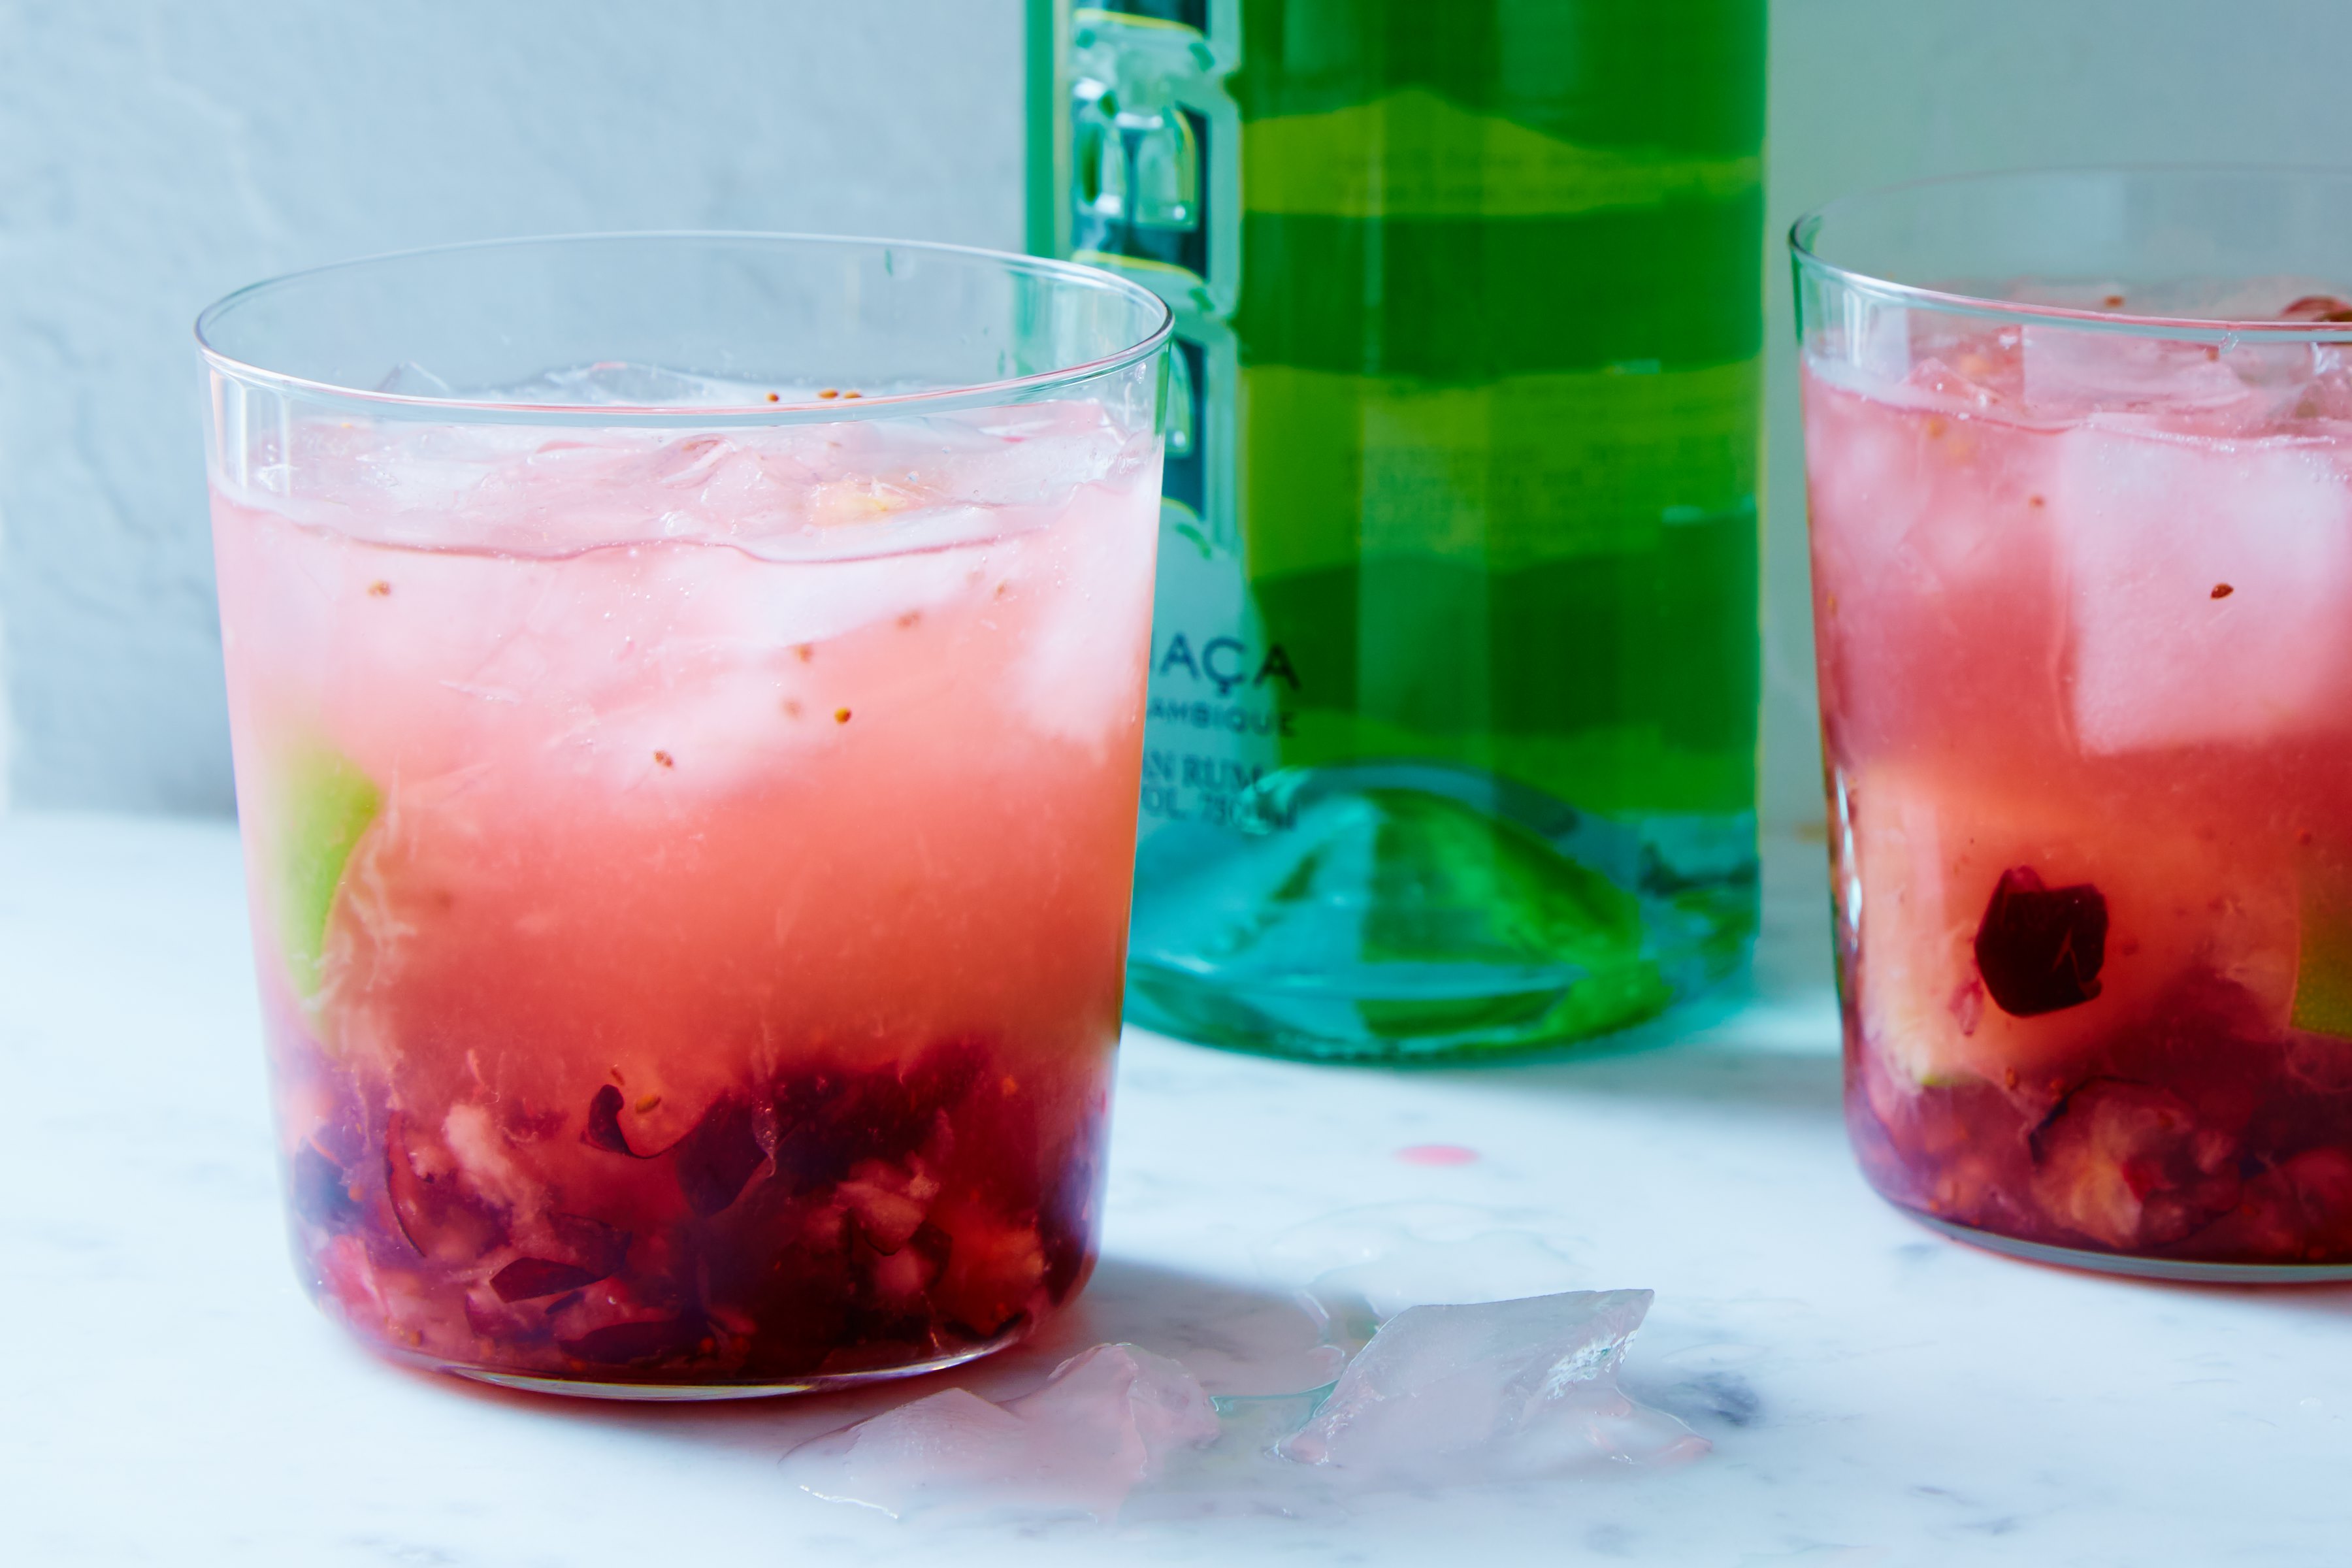 2 red cranberry caipirnha cocktails with ice in clear glasses beside a green bottle against a blue background